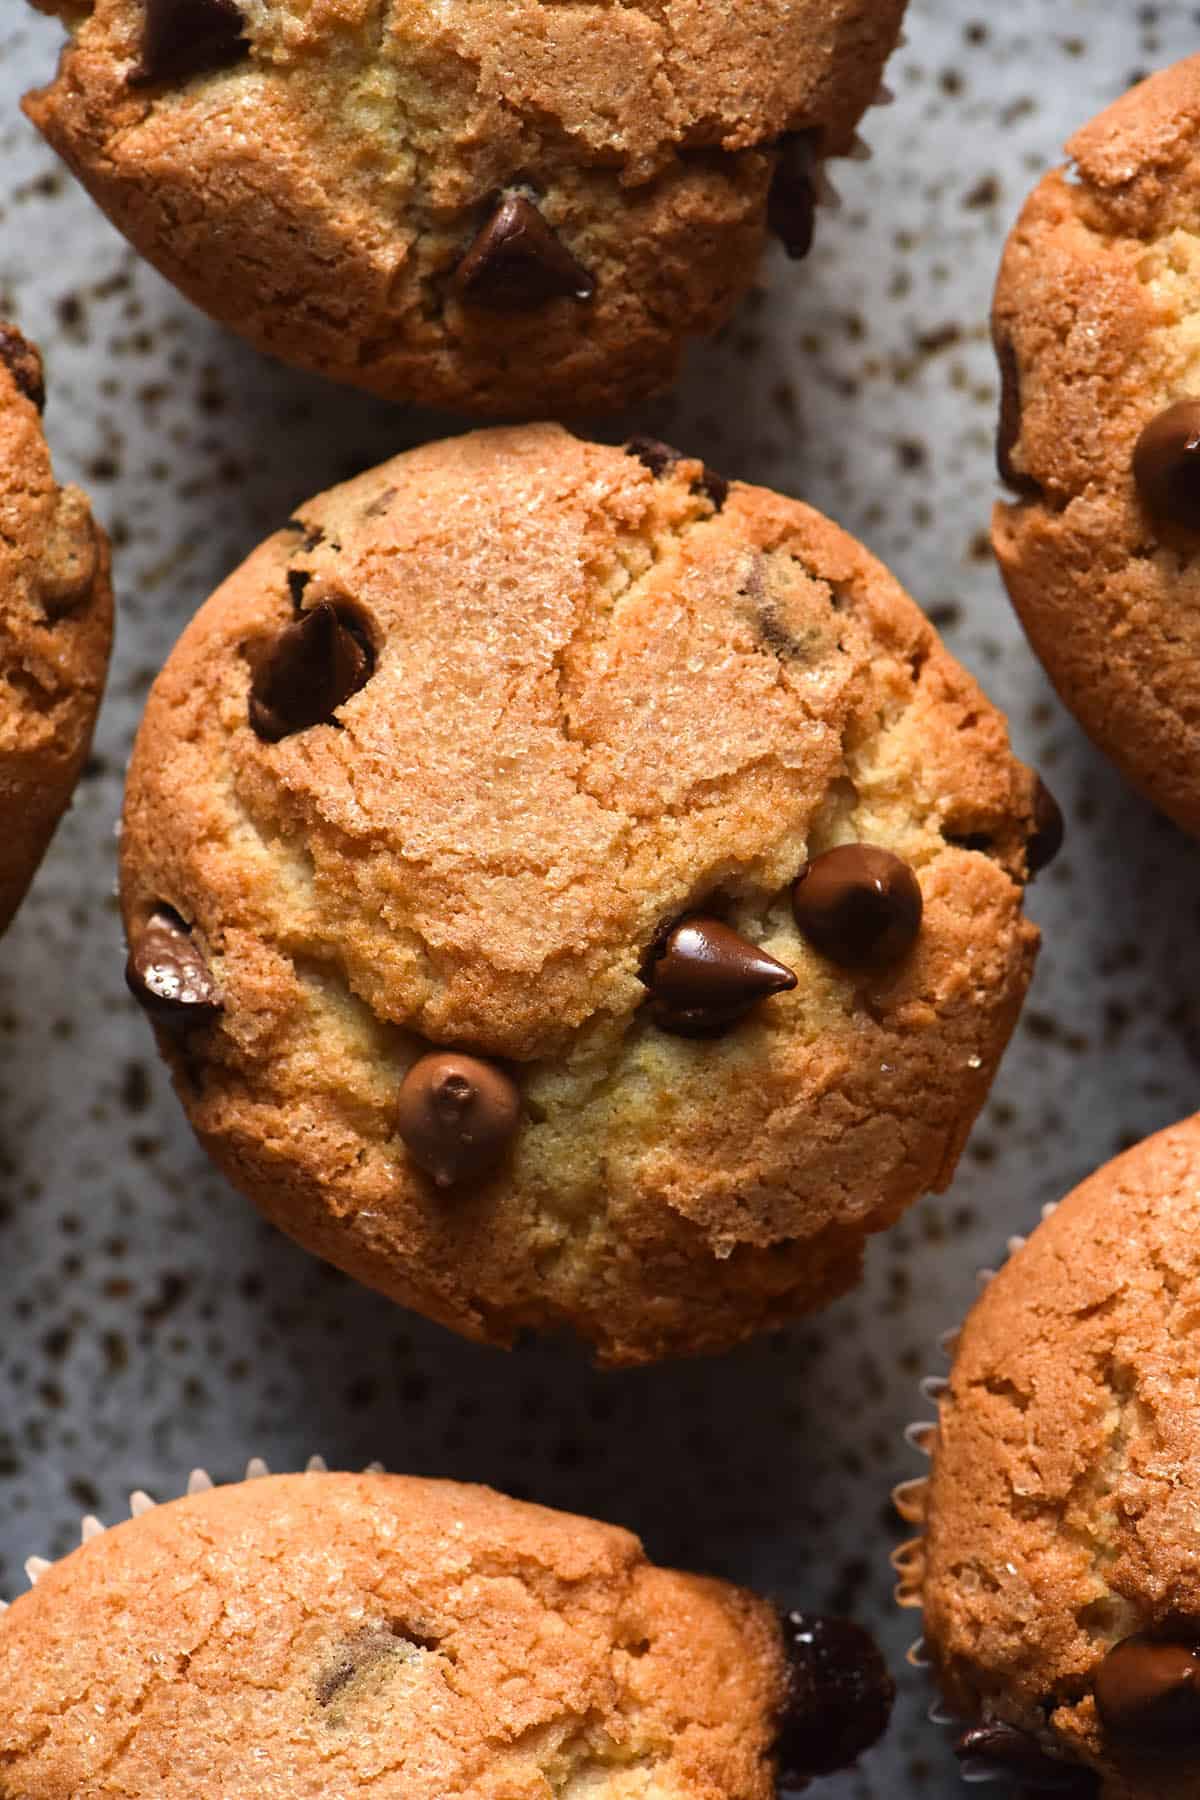 An aerial image of gluten free chocolate chip muffins atop a white speckled ceramic plate. The muffins are golden brown and studded with chocolate chips.